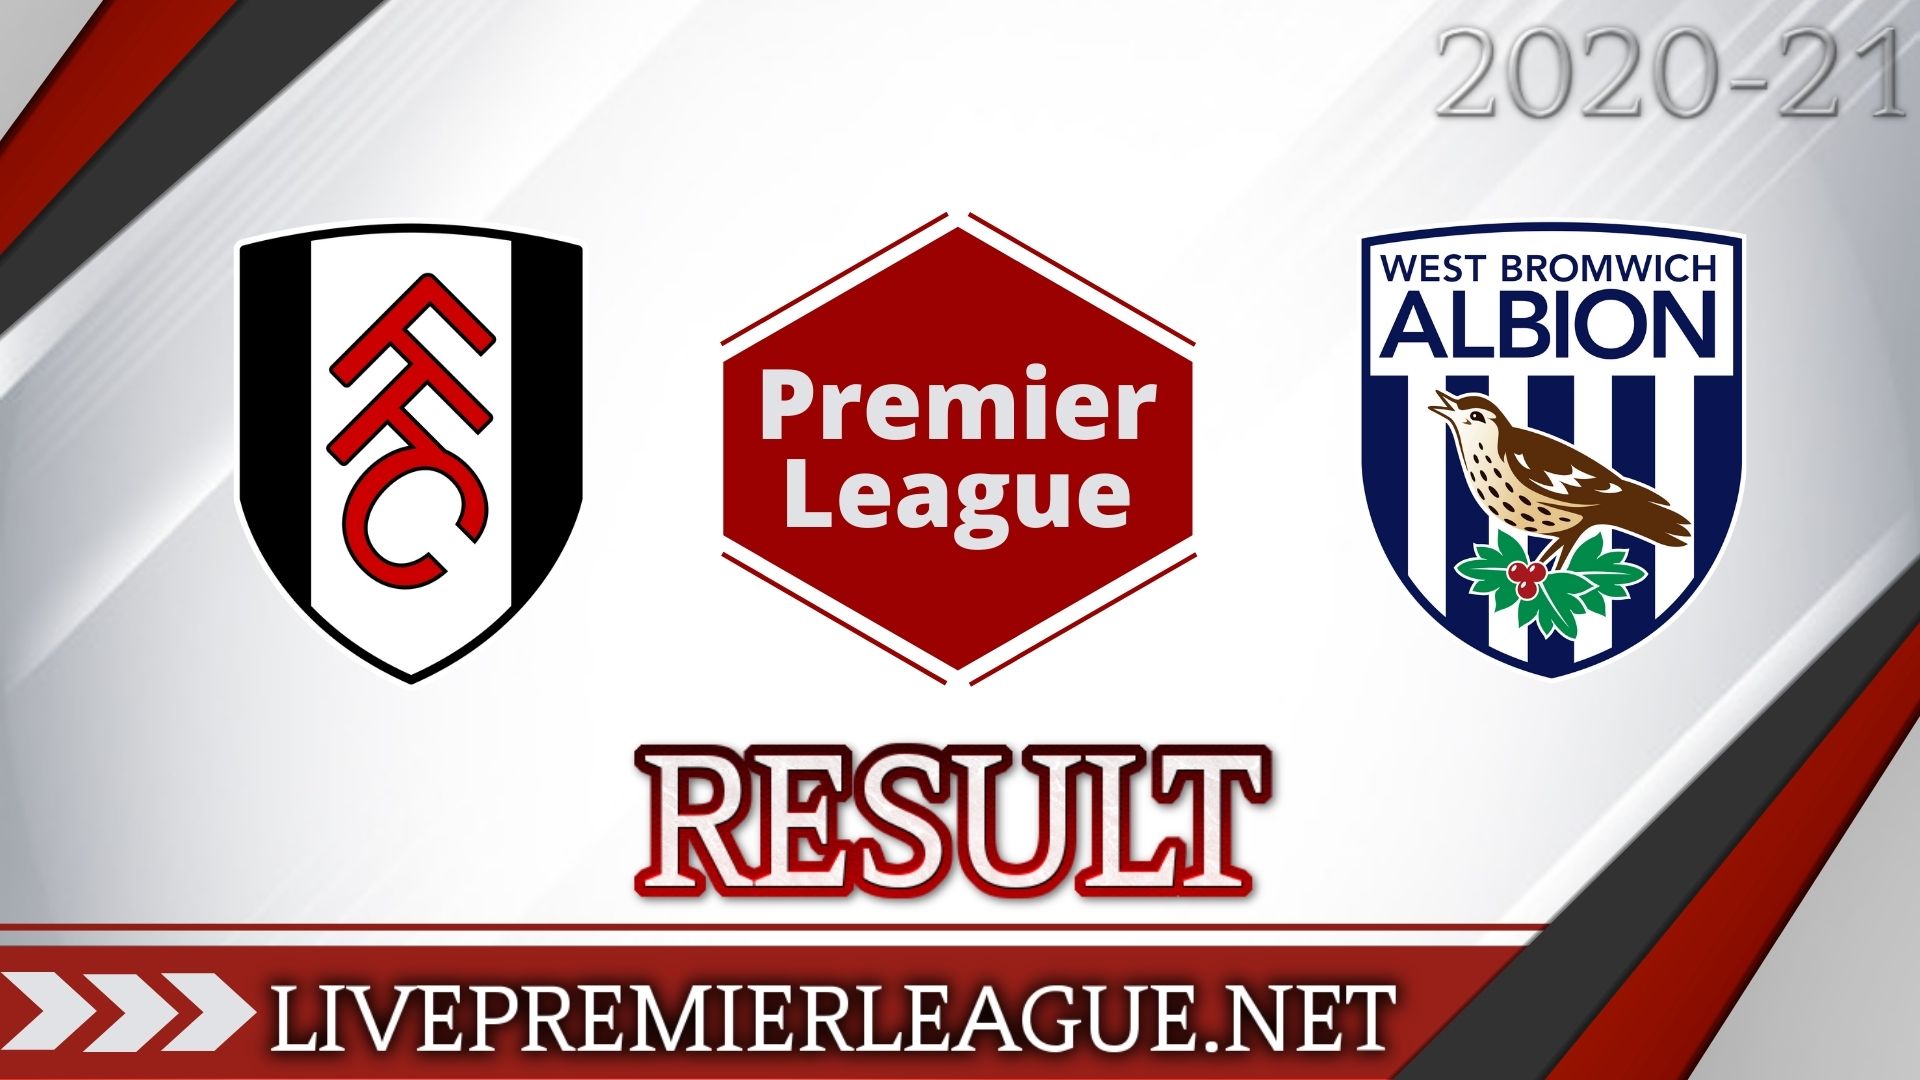 Fulham Vs West Bromwich Albion | Week 7 Result 2020